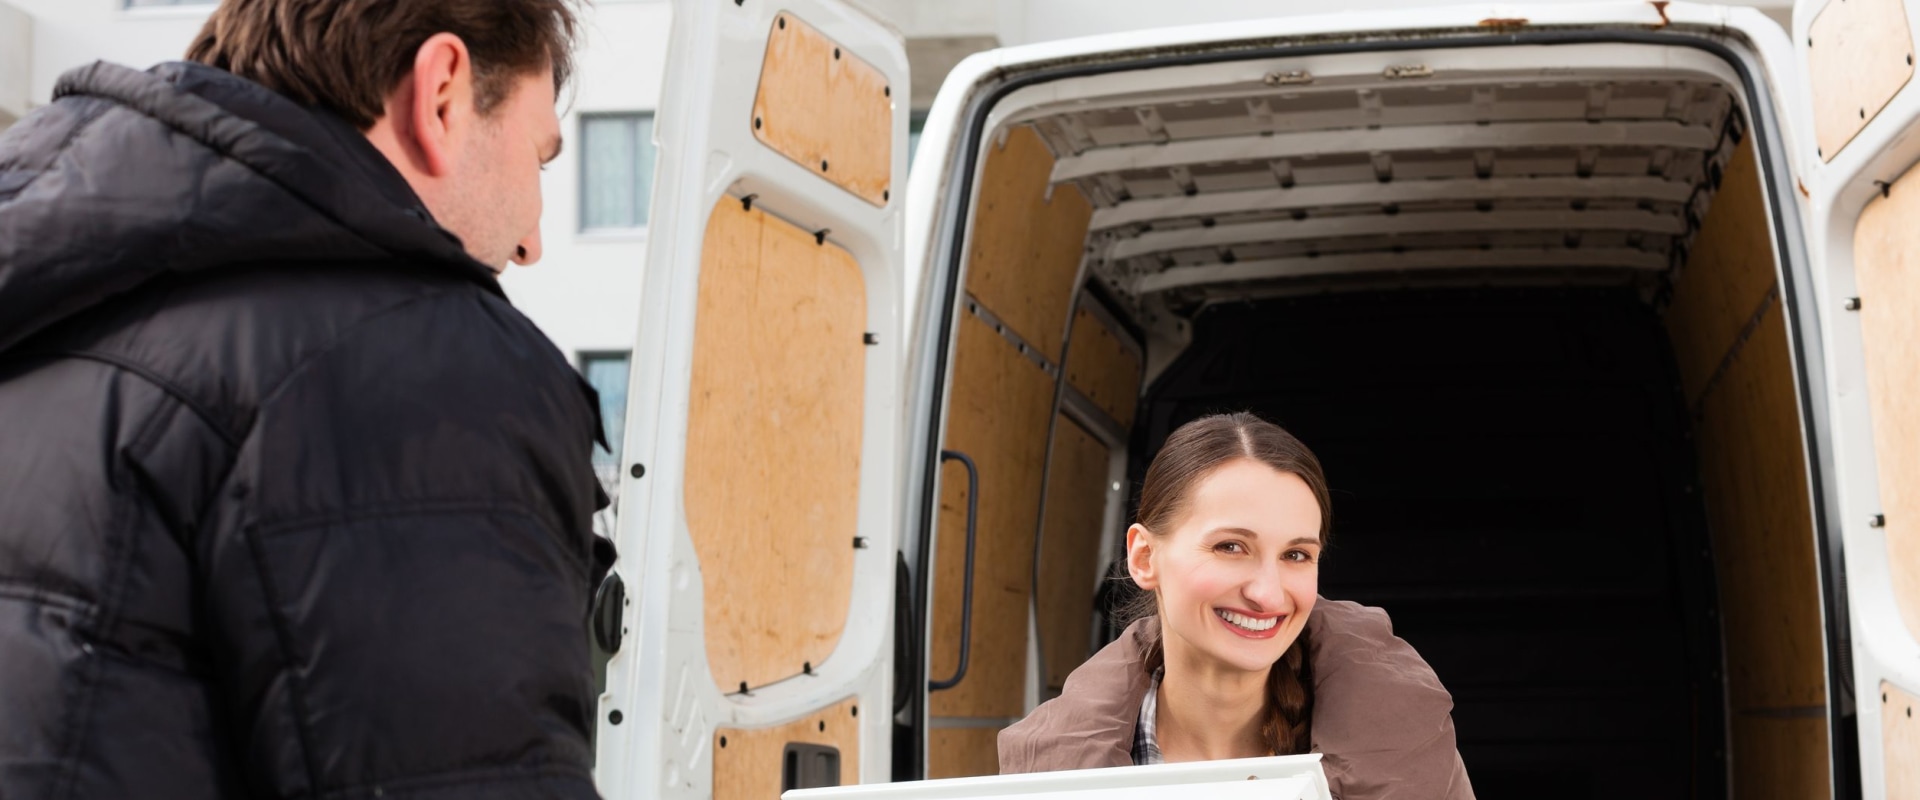 How much does it cost to rent a moving truck in nyc?